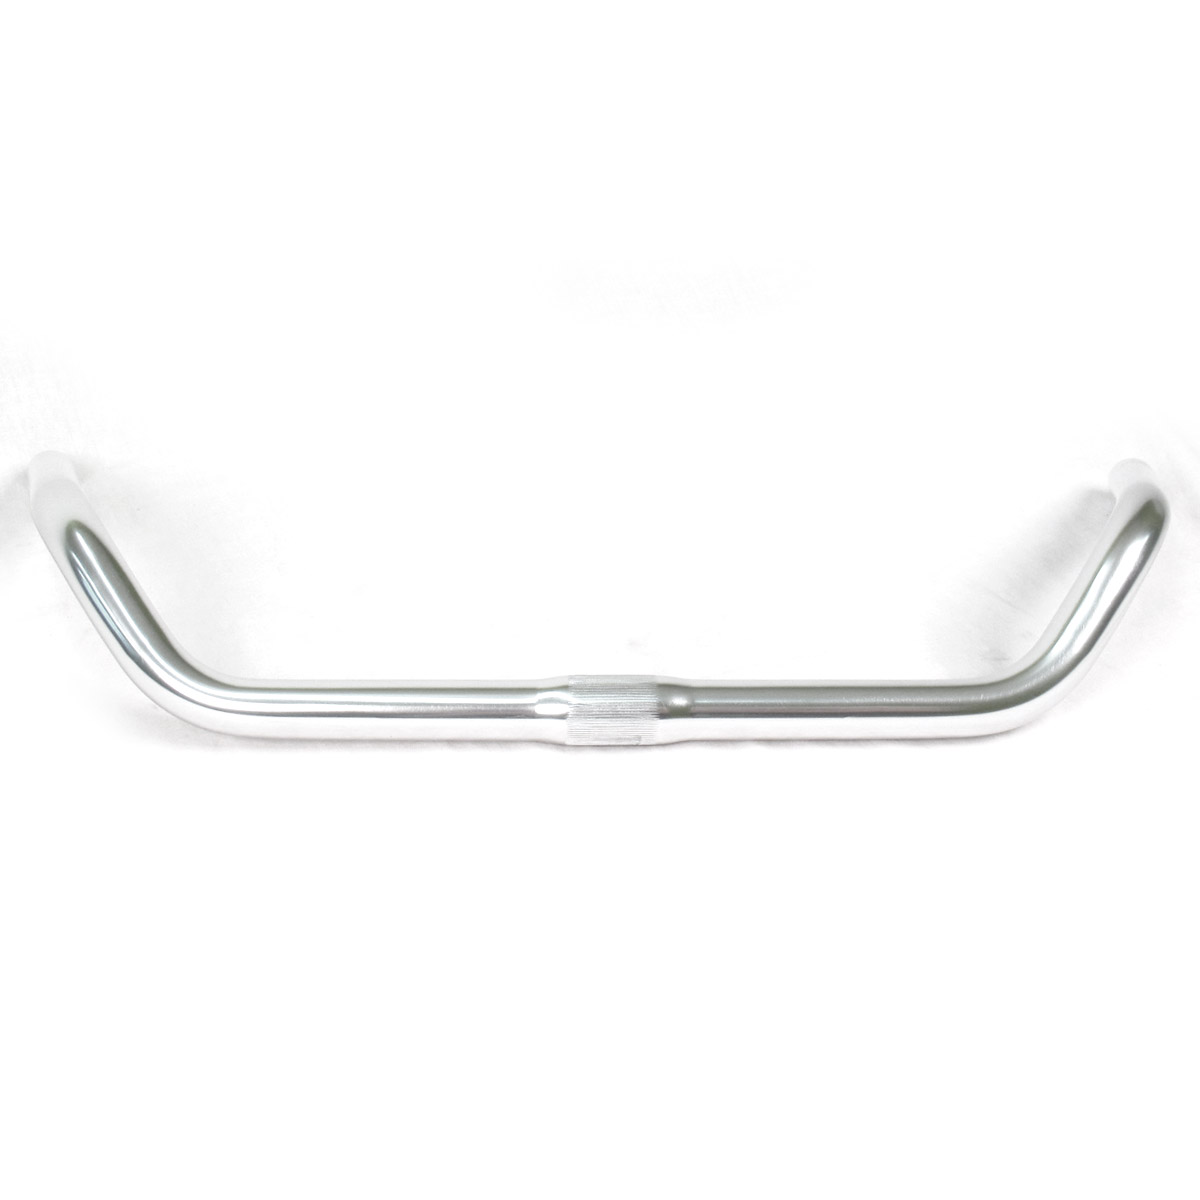 Nitto B602AA Promenade 49cm Road Bicycle Handlebar 25.4mm Silver for sale online 